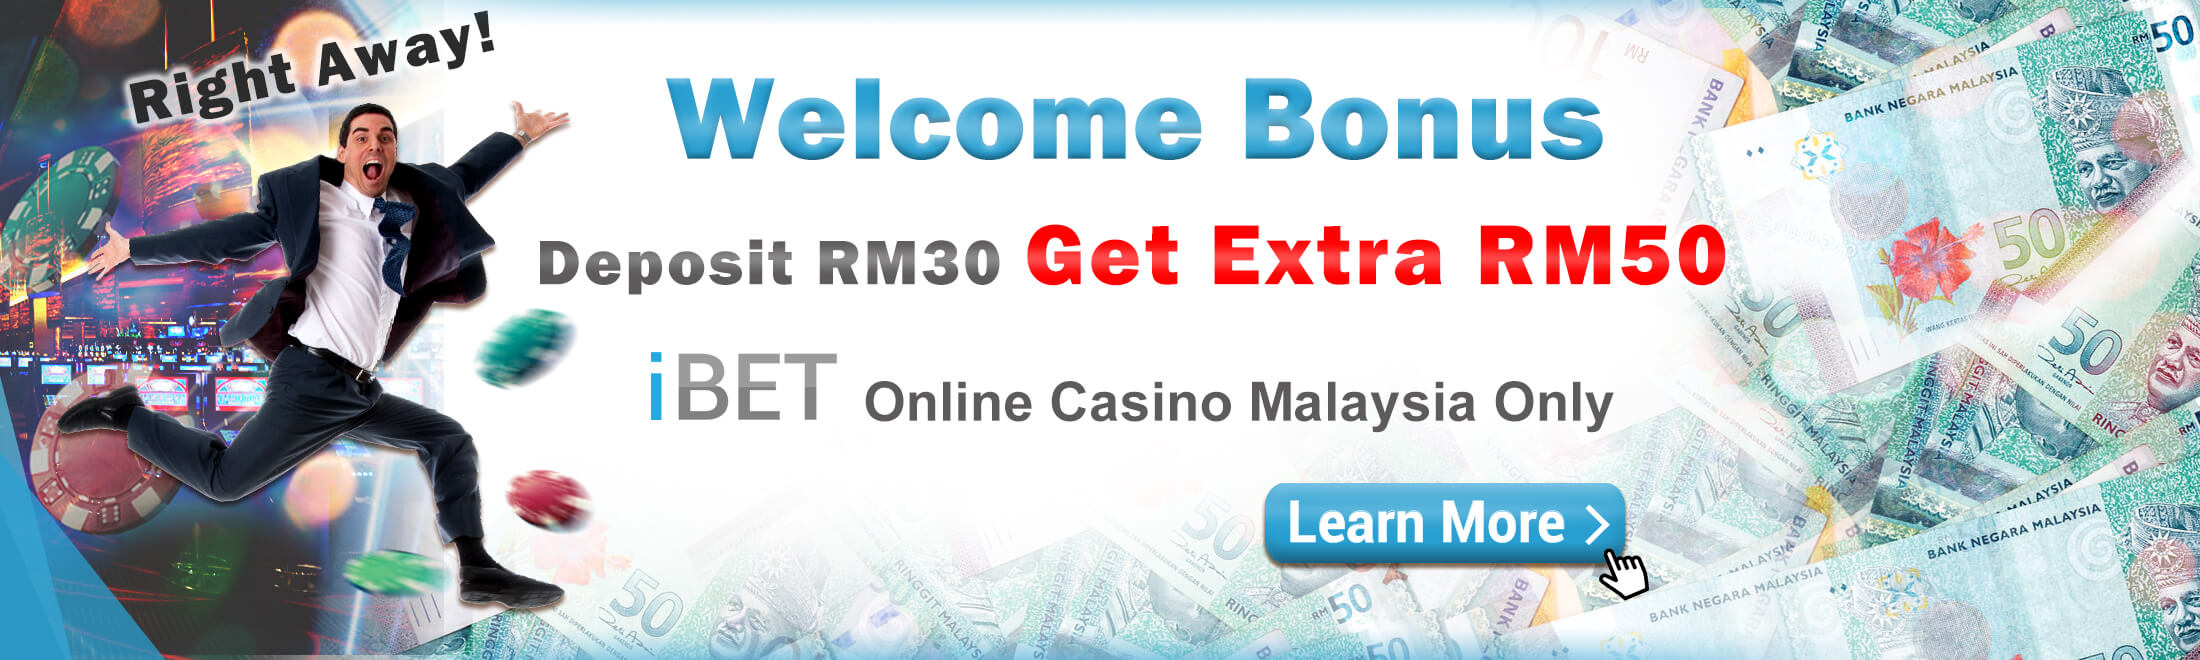 Dposit RM3 0Free RM 50!!! iBET Online Casino Malaysia Only